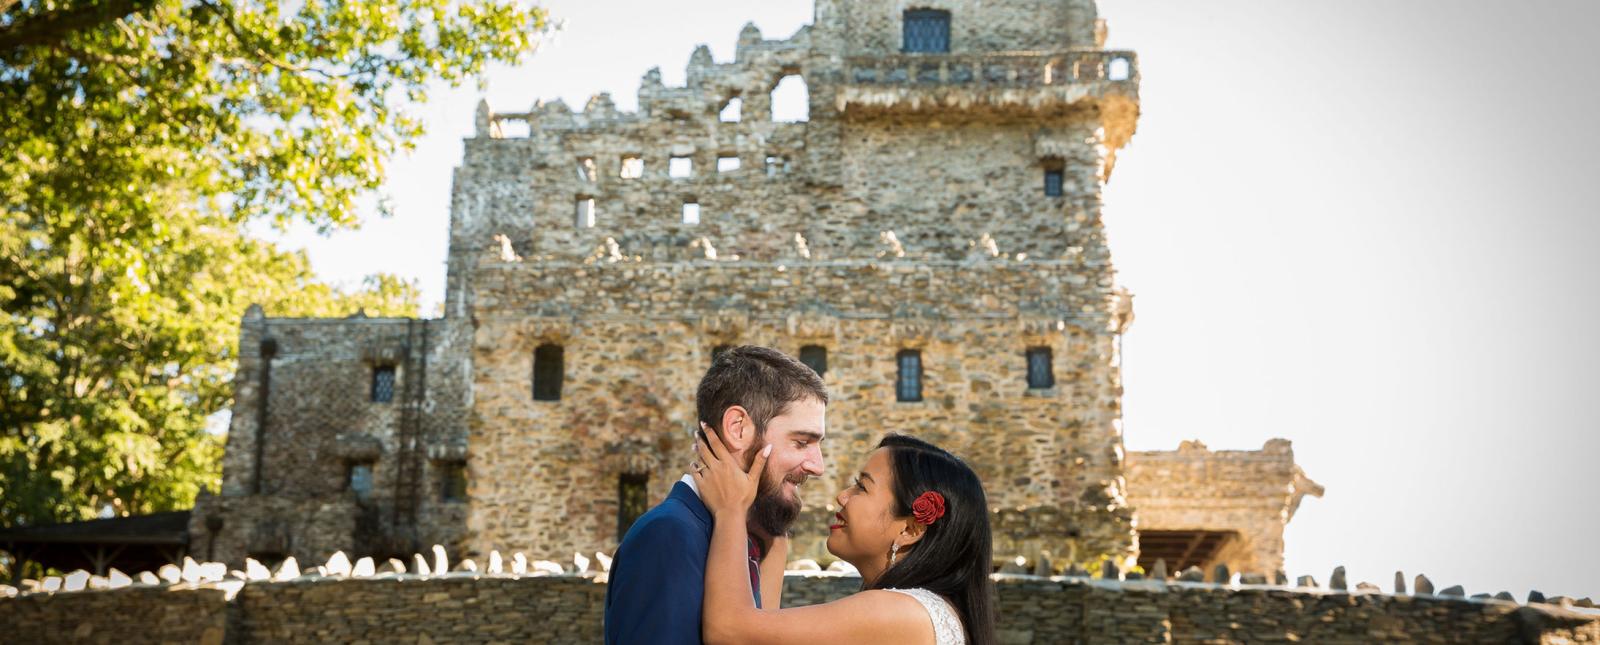 Image of newly married couple in front of Gillette Castle (@nickcineaphotography)